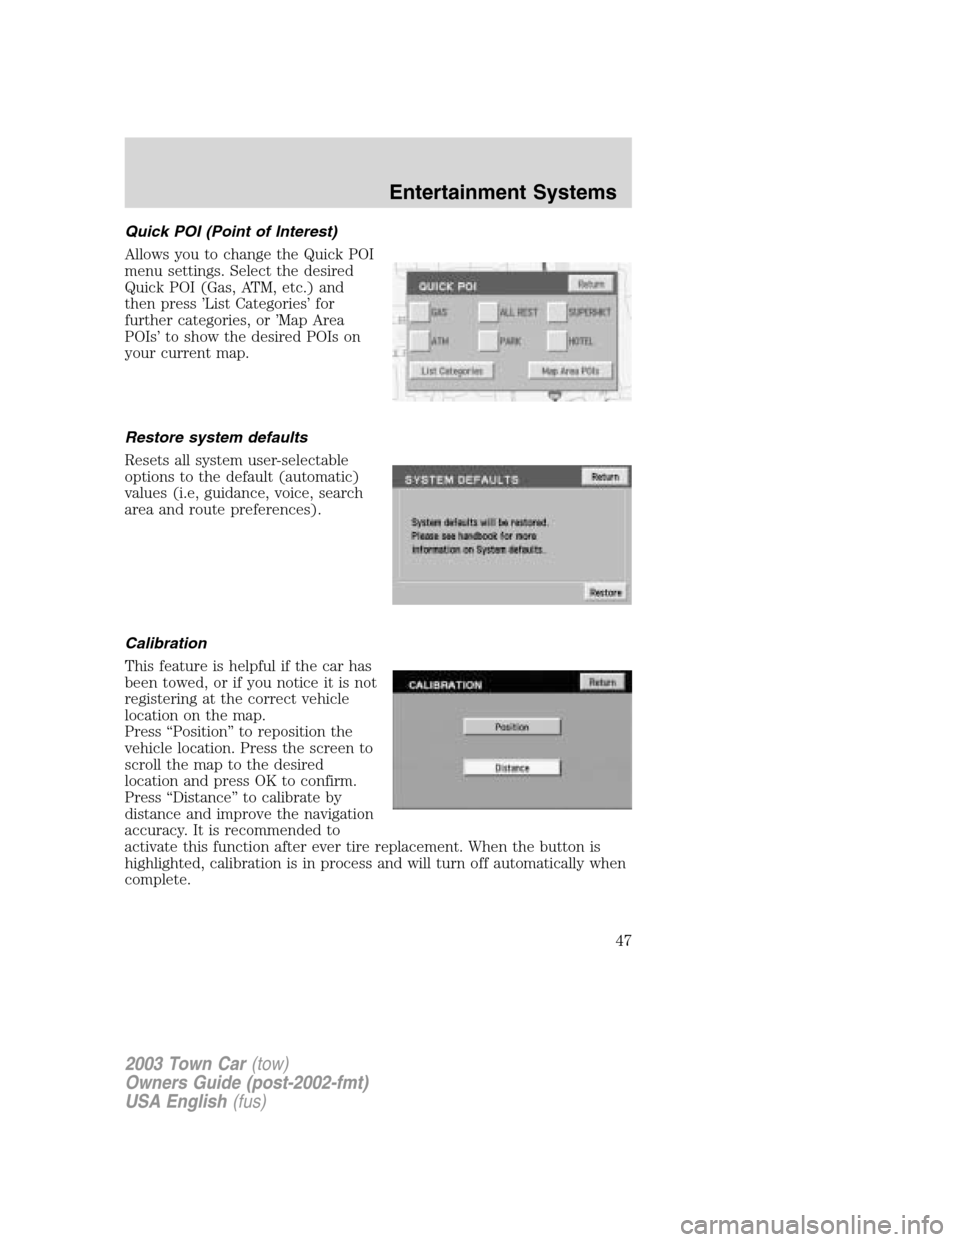 LINCOLN TOWN CAR 2003  Owners Manual Quick POI (Point of Interest)
Allows you to change the Quick POI
menu settings. Select the desired
Quick POI (Gas, ATM, etc.) and
then press’List Categories’for
further categories, or’Map Area
P